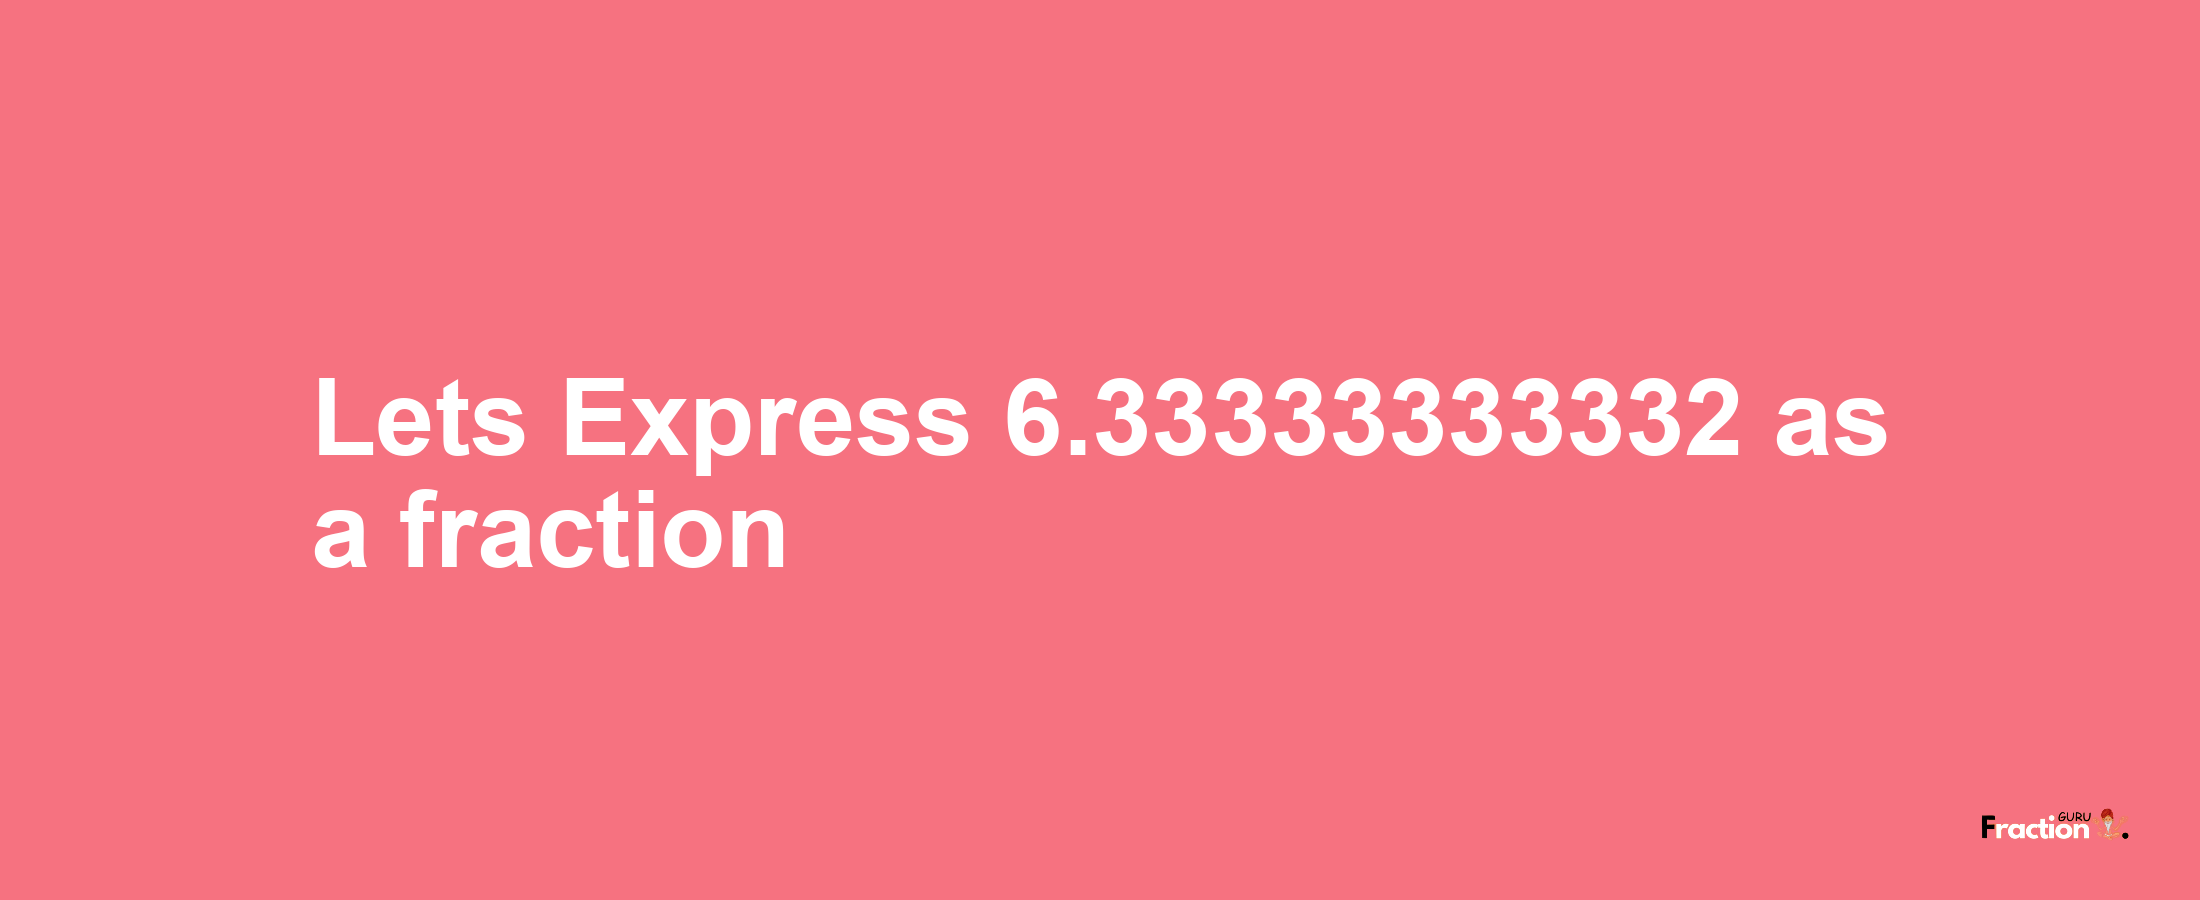 Lets Express 6.33333333332 as afraction